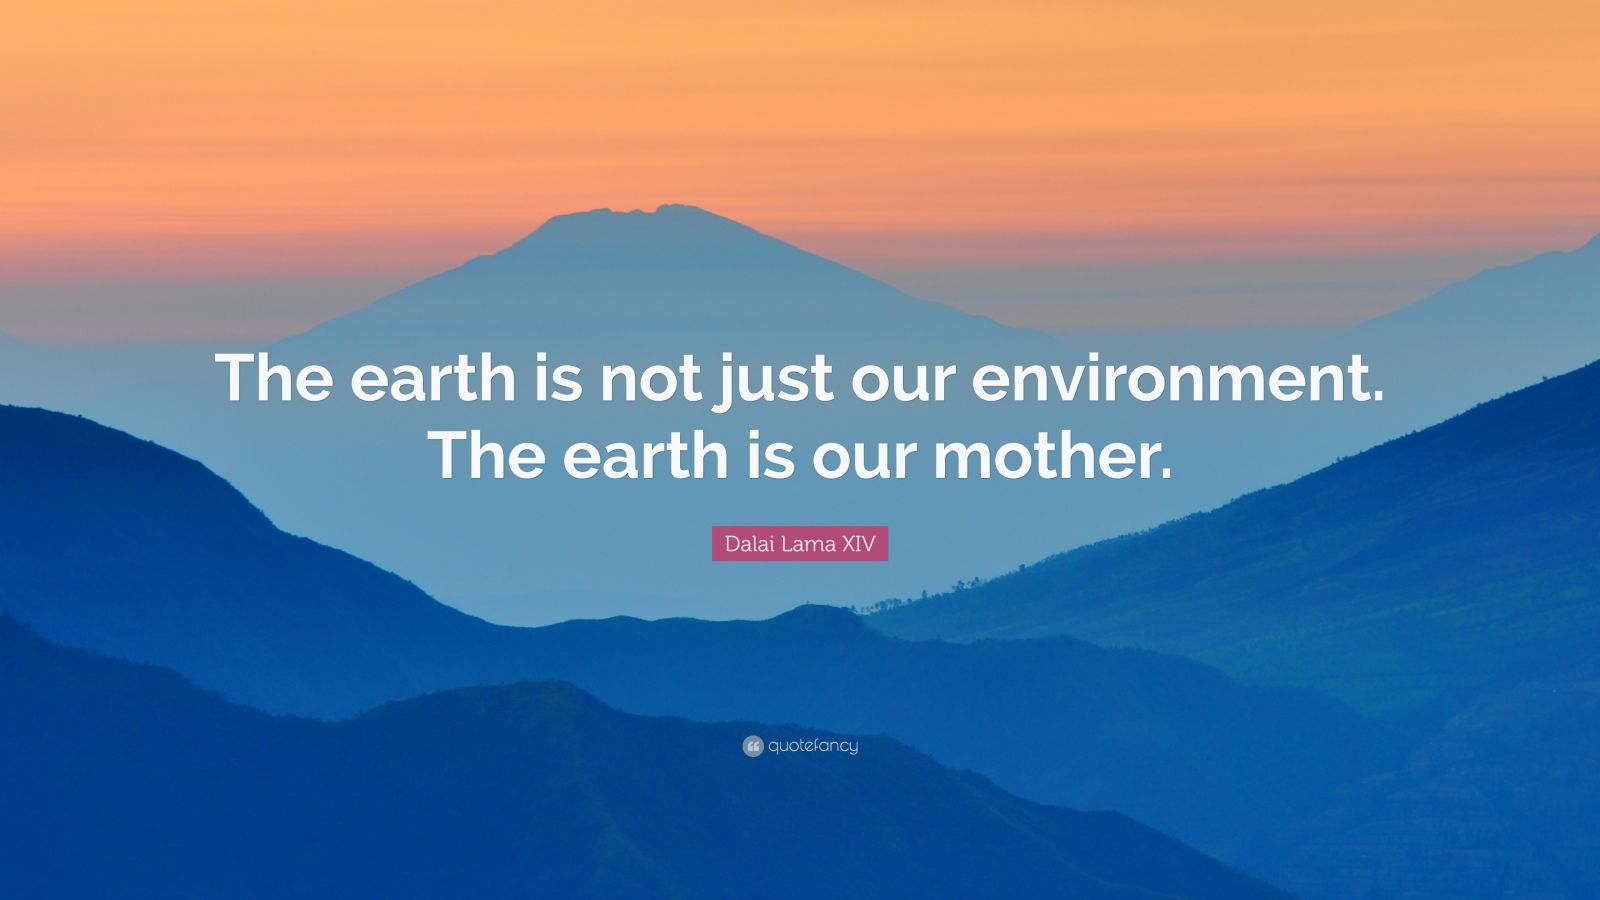 Dalai Lama XIV Quote: “The earth is not just our environment. The earth